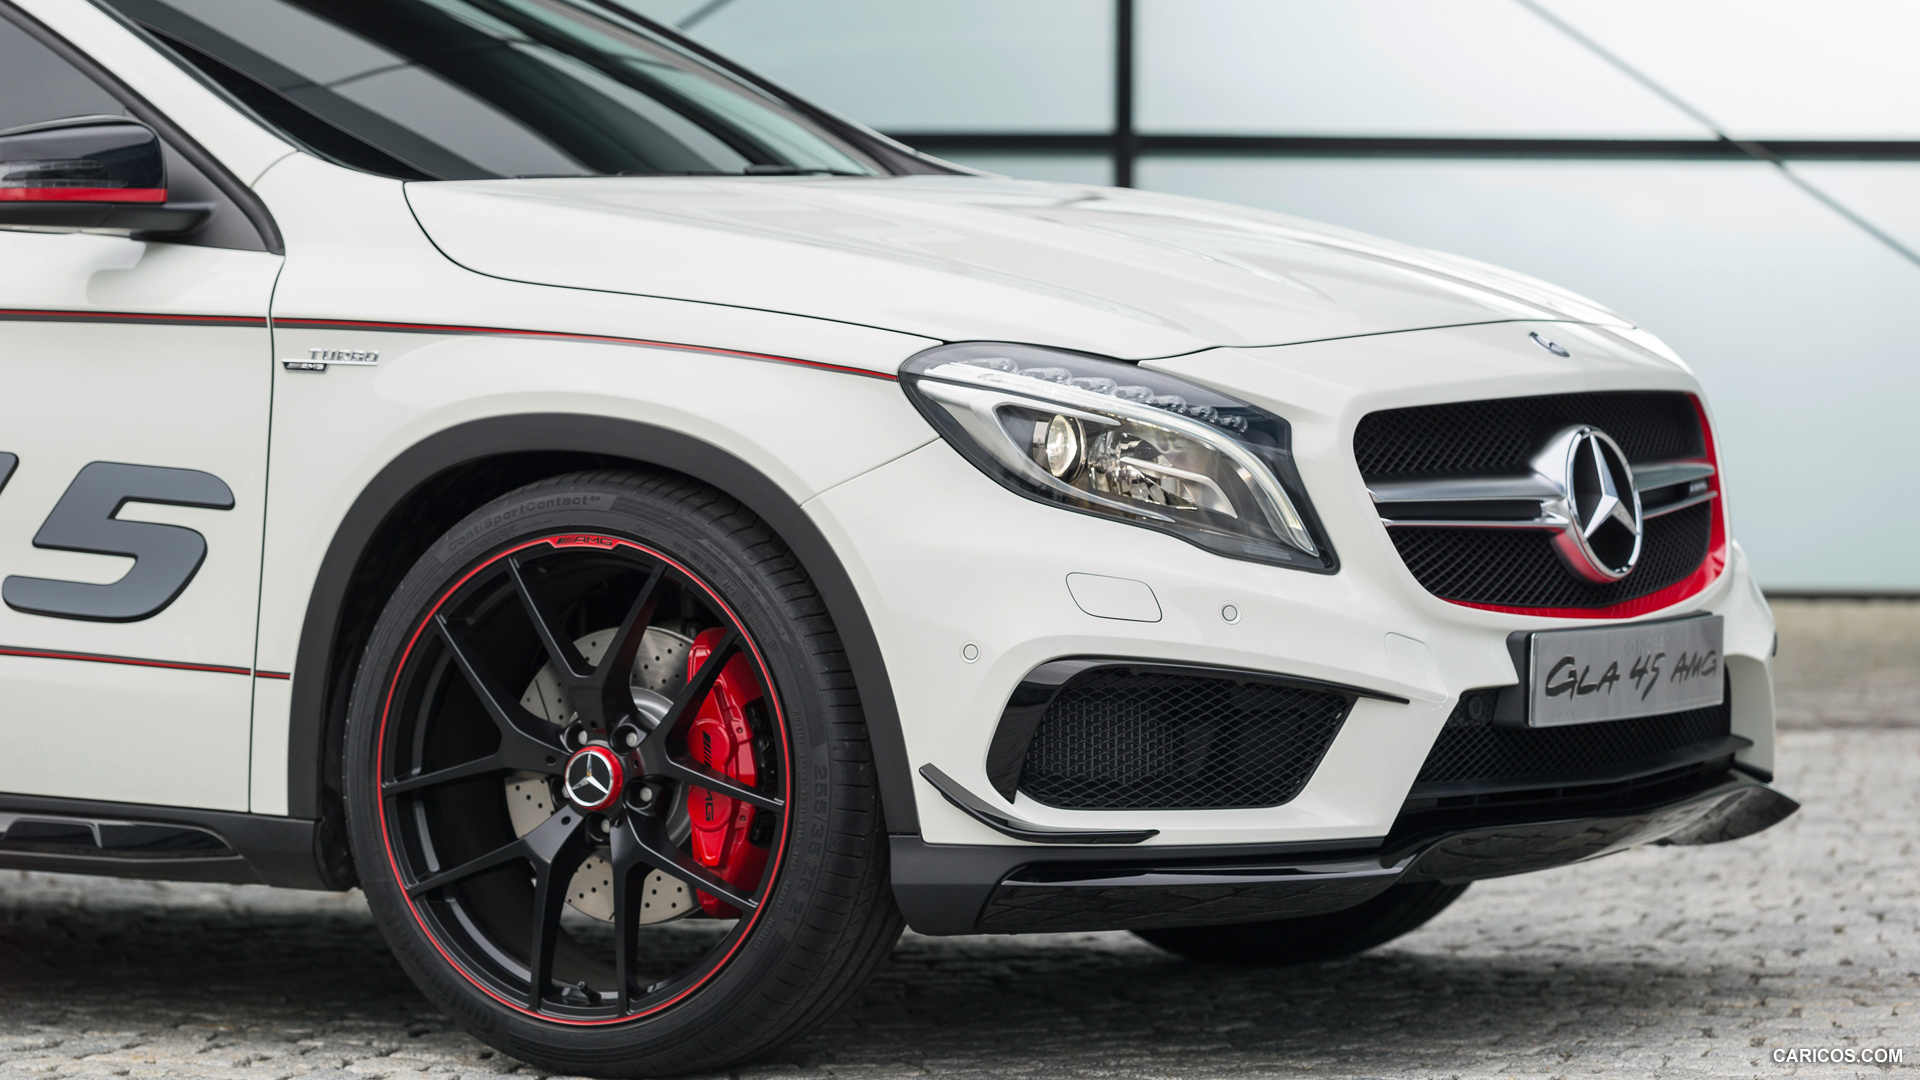 Mercedes-Benz GLA 45 AMG Concept (2013)  - Front, #4 of 15